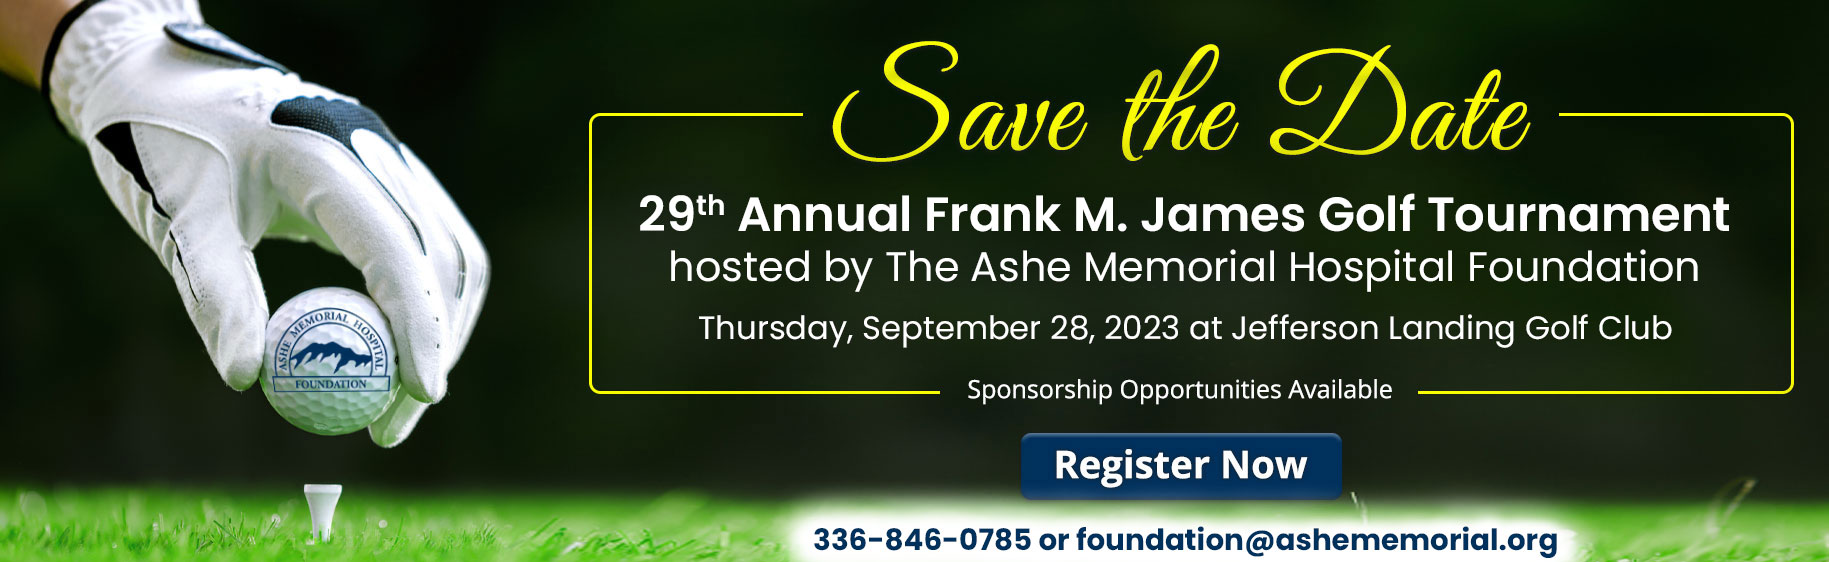 Banner picture of a golfer's hand in a glove putting a golf ball down on to a T that is sticking up out of the ground.

Banner says:


Save The Date
28th Annual Frank M. James Golf Tournament
hosted by The Ashe Memorial Hospital Foundation
Thursday, September 29, 2022 at Jefferson Landing Golf Club

Sponsored Opportunities Available

(Register Now)

336-846-0842 or foundation@ashememorial.org